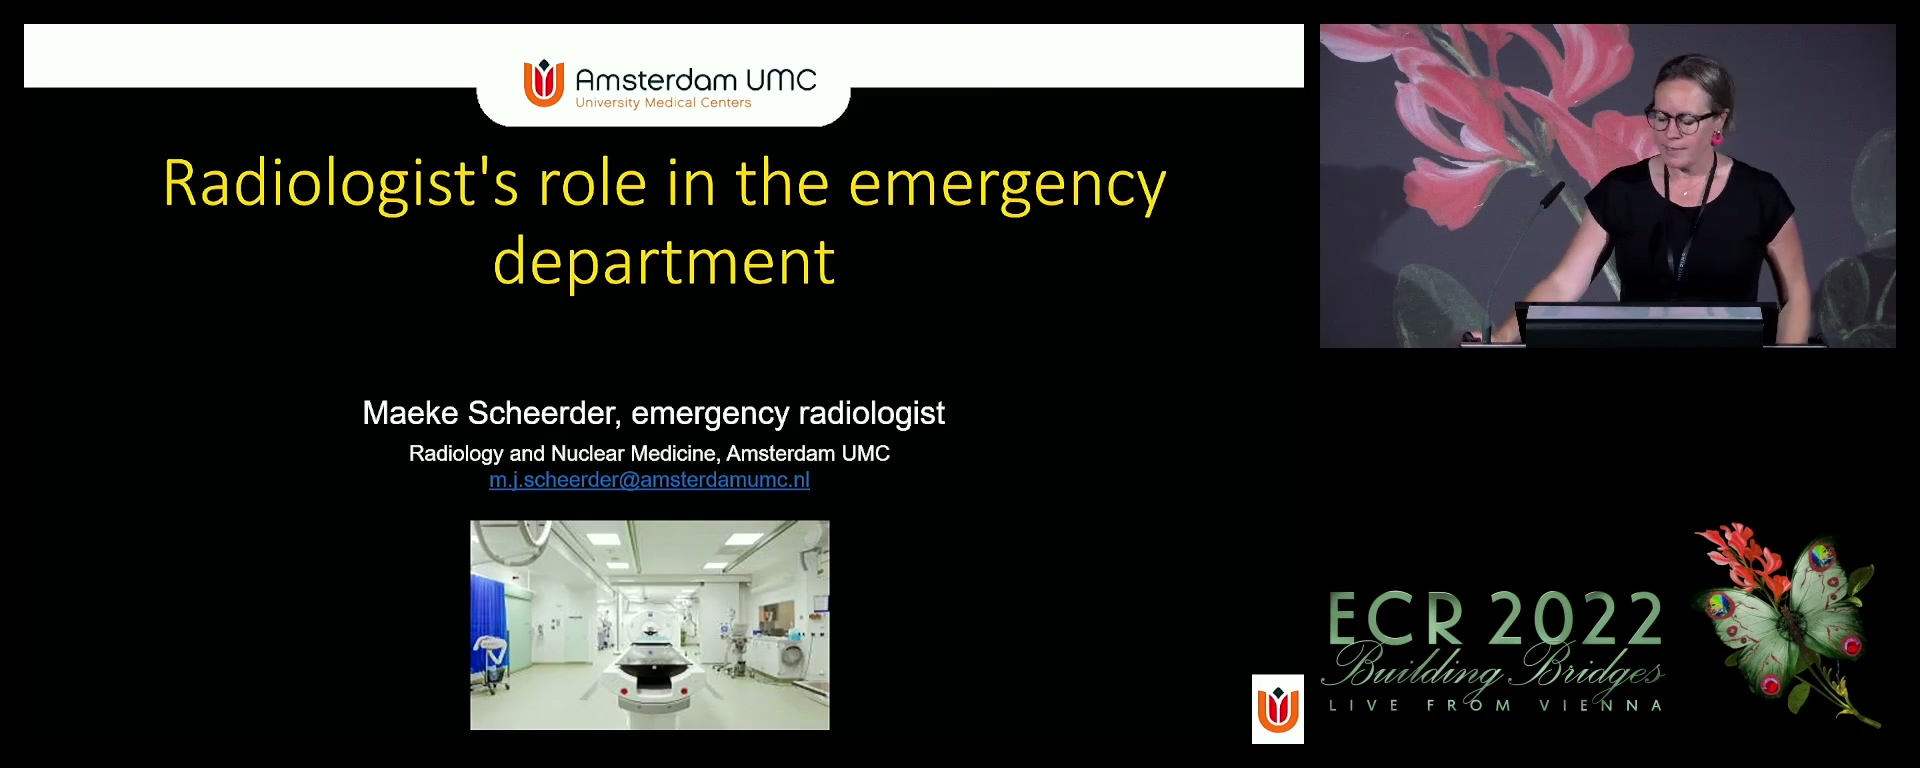 Radiologist's role in the acute emergency (AE) department